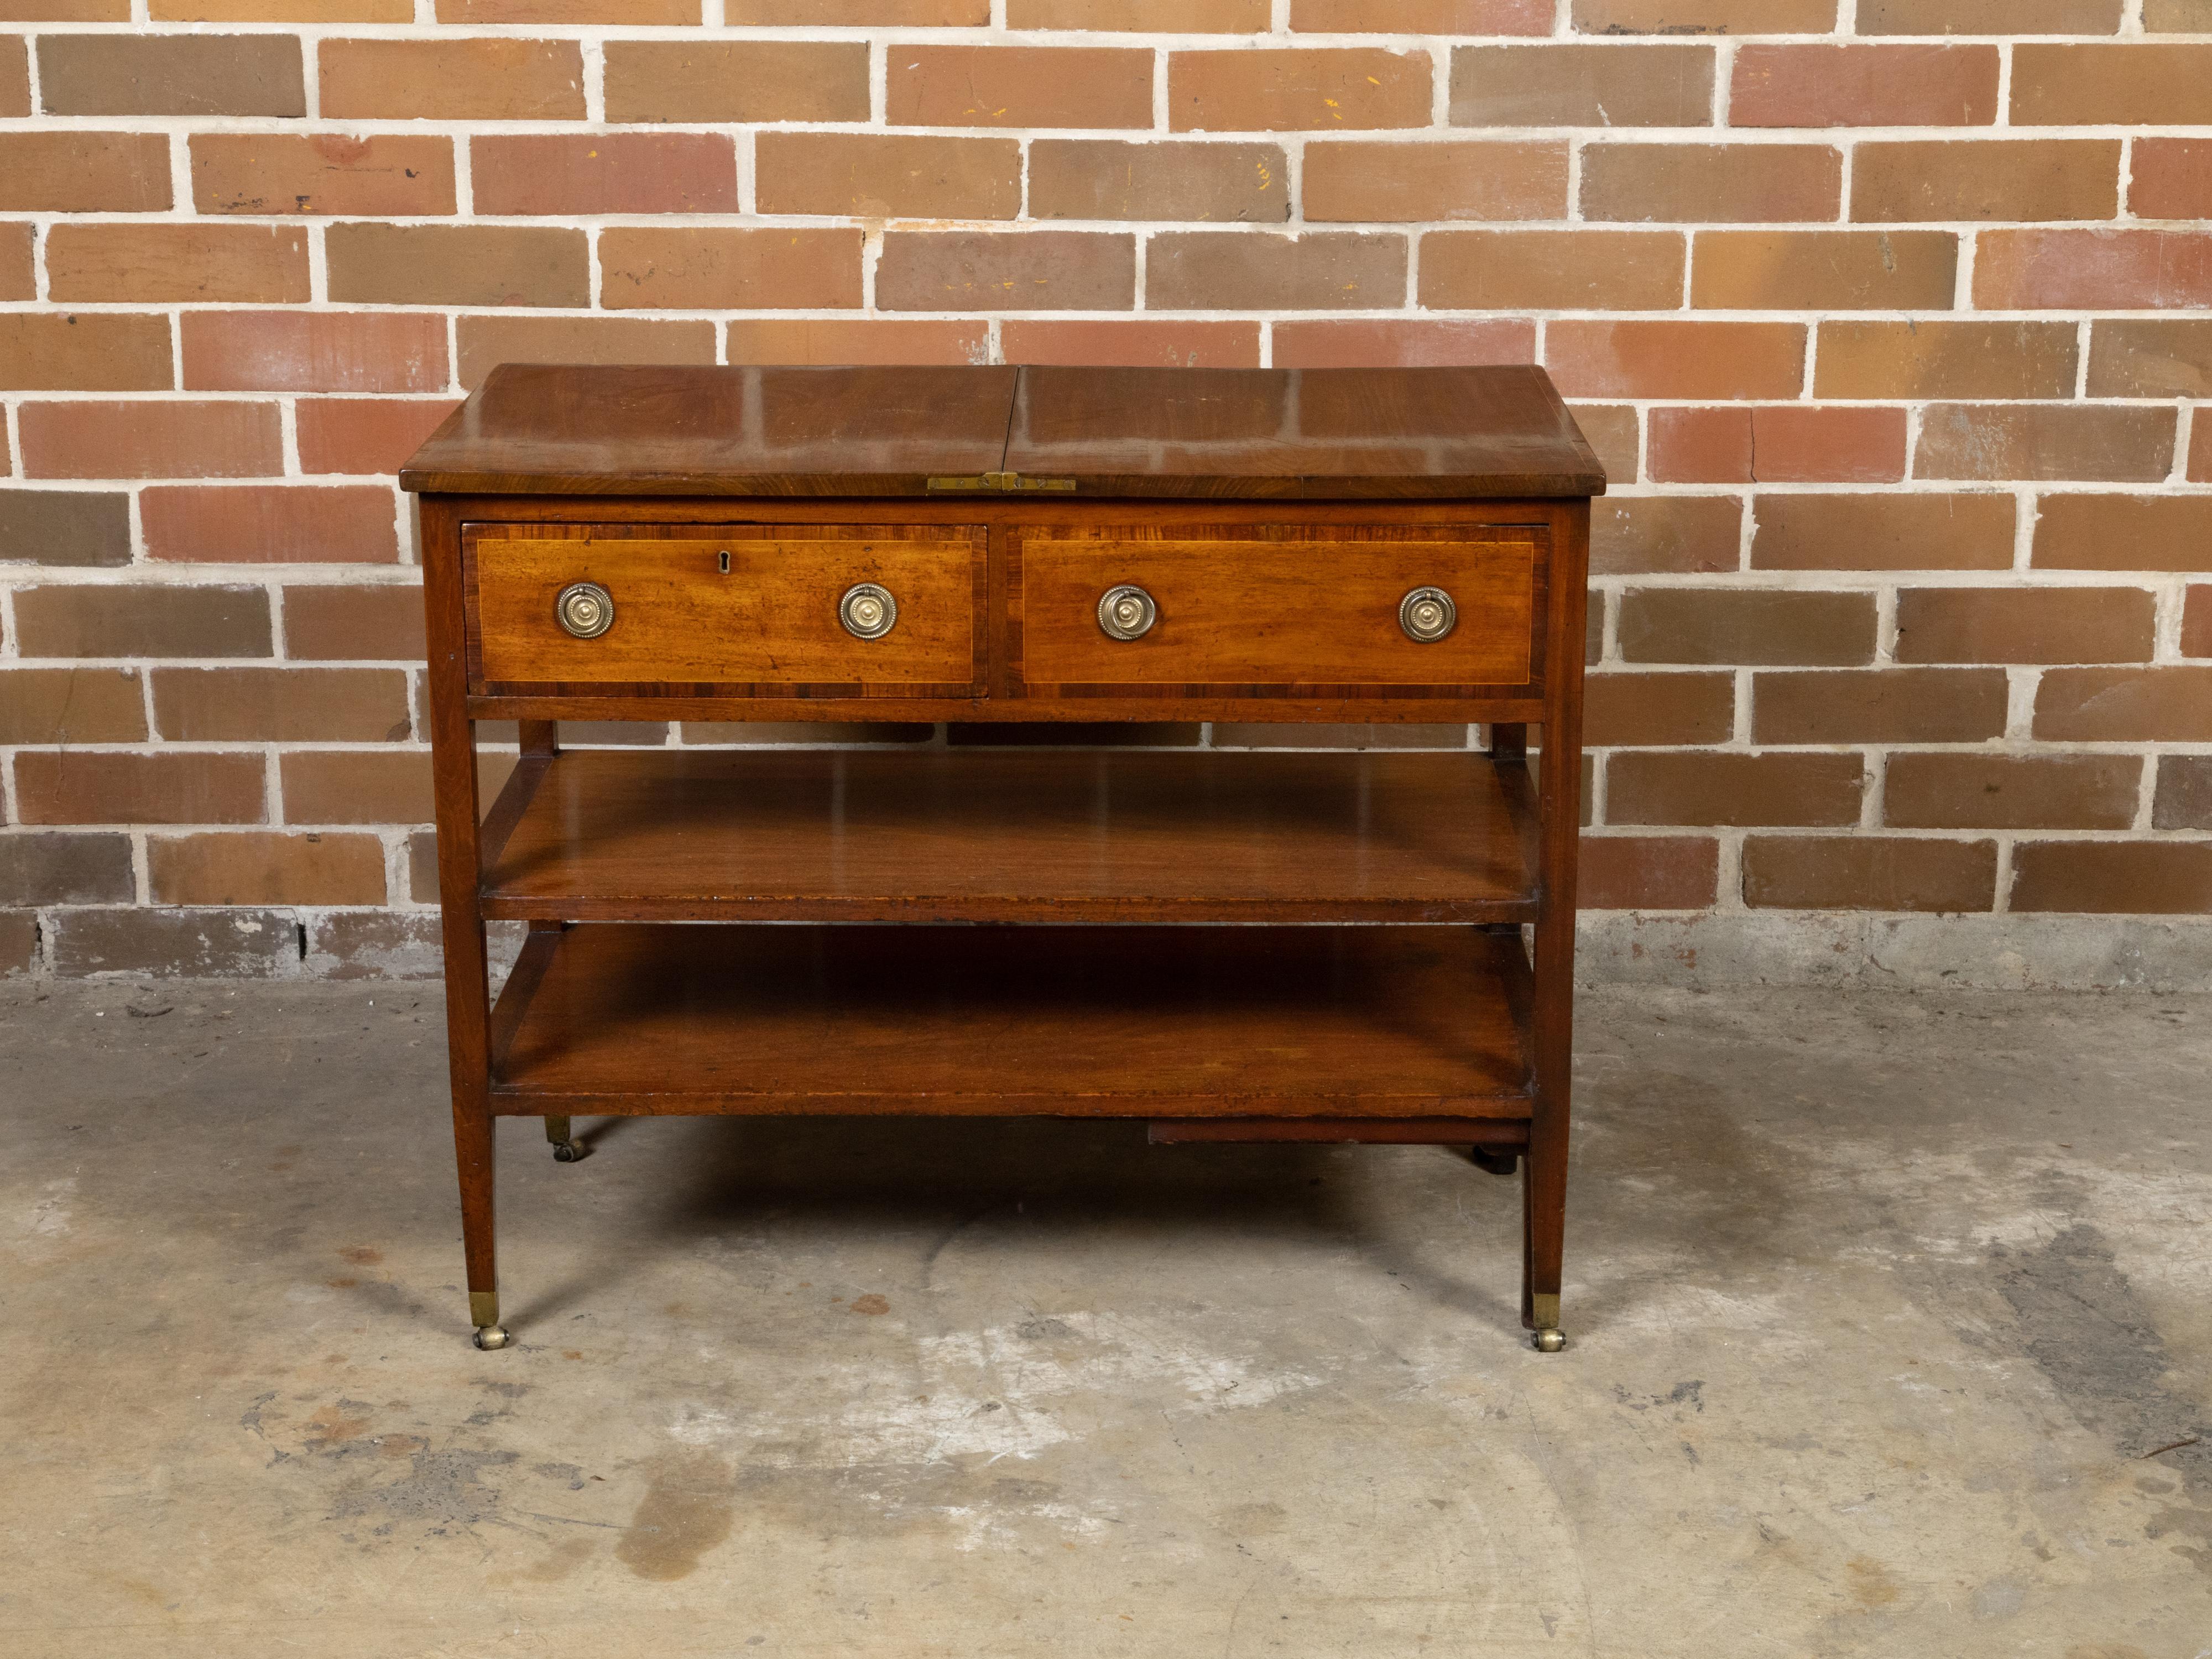 Veneer English 19th Century Metamorphic Table with Lift Top, Drawers and Shelves For Sale